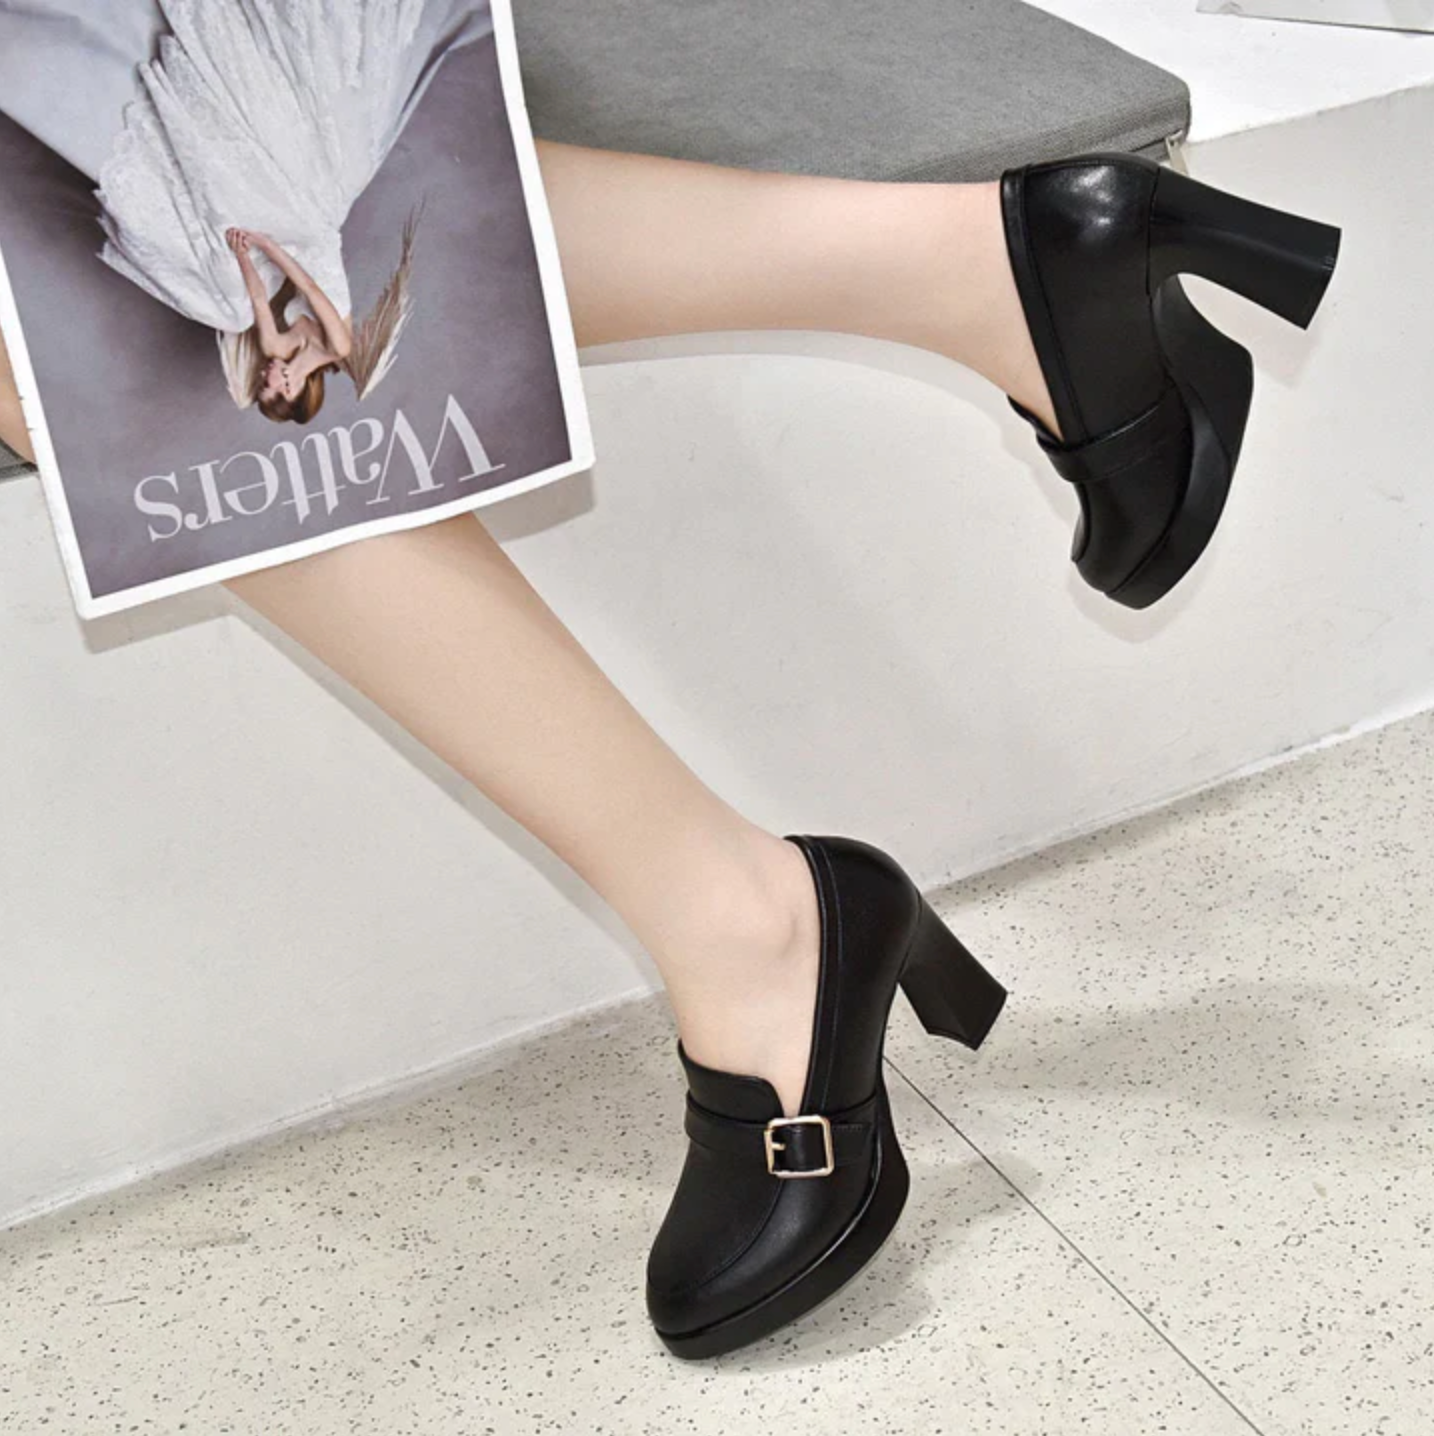 Orthopaedic high heels for greater comfort